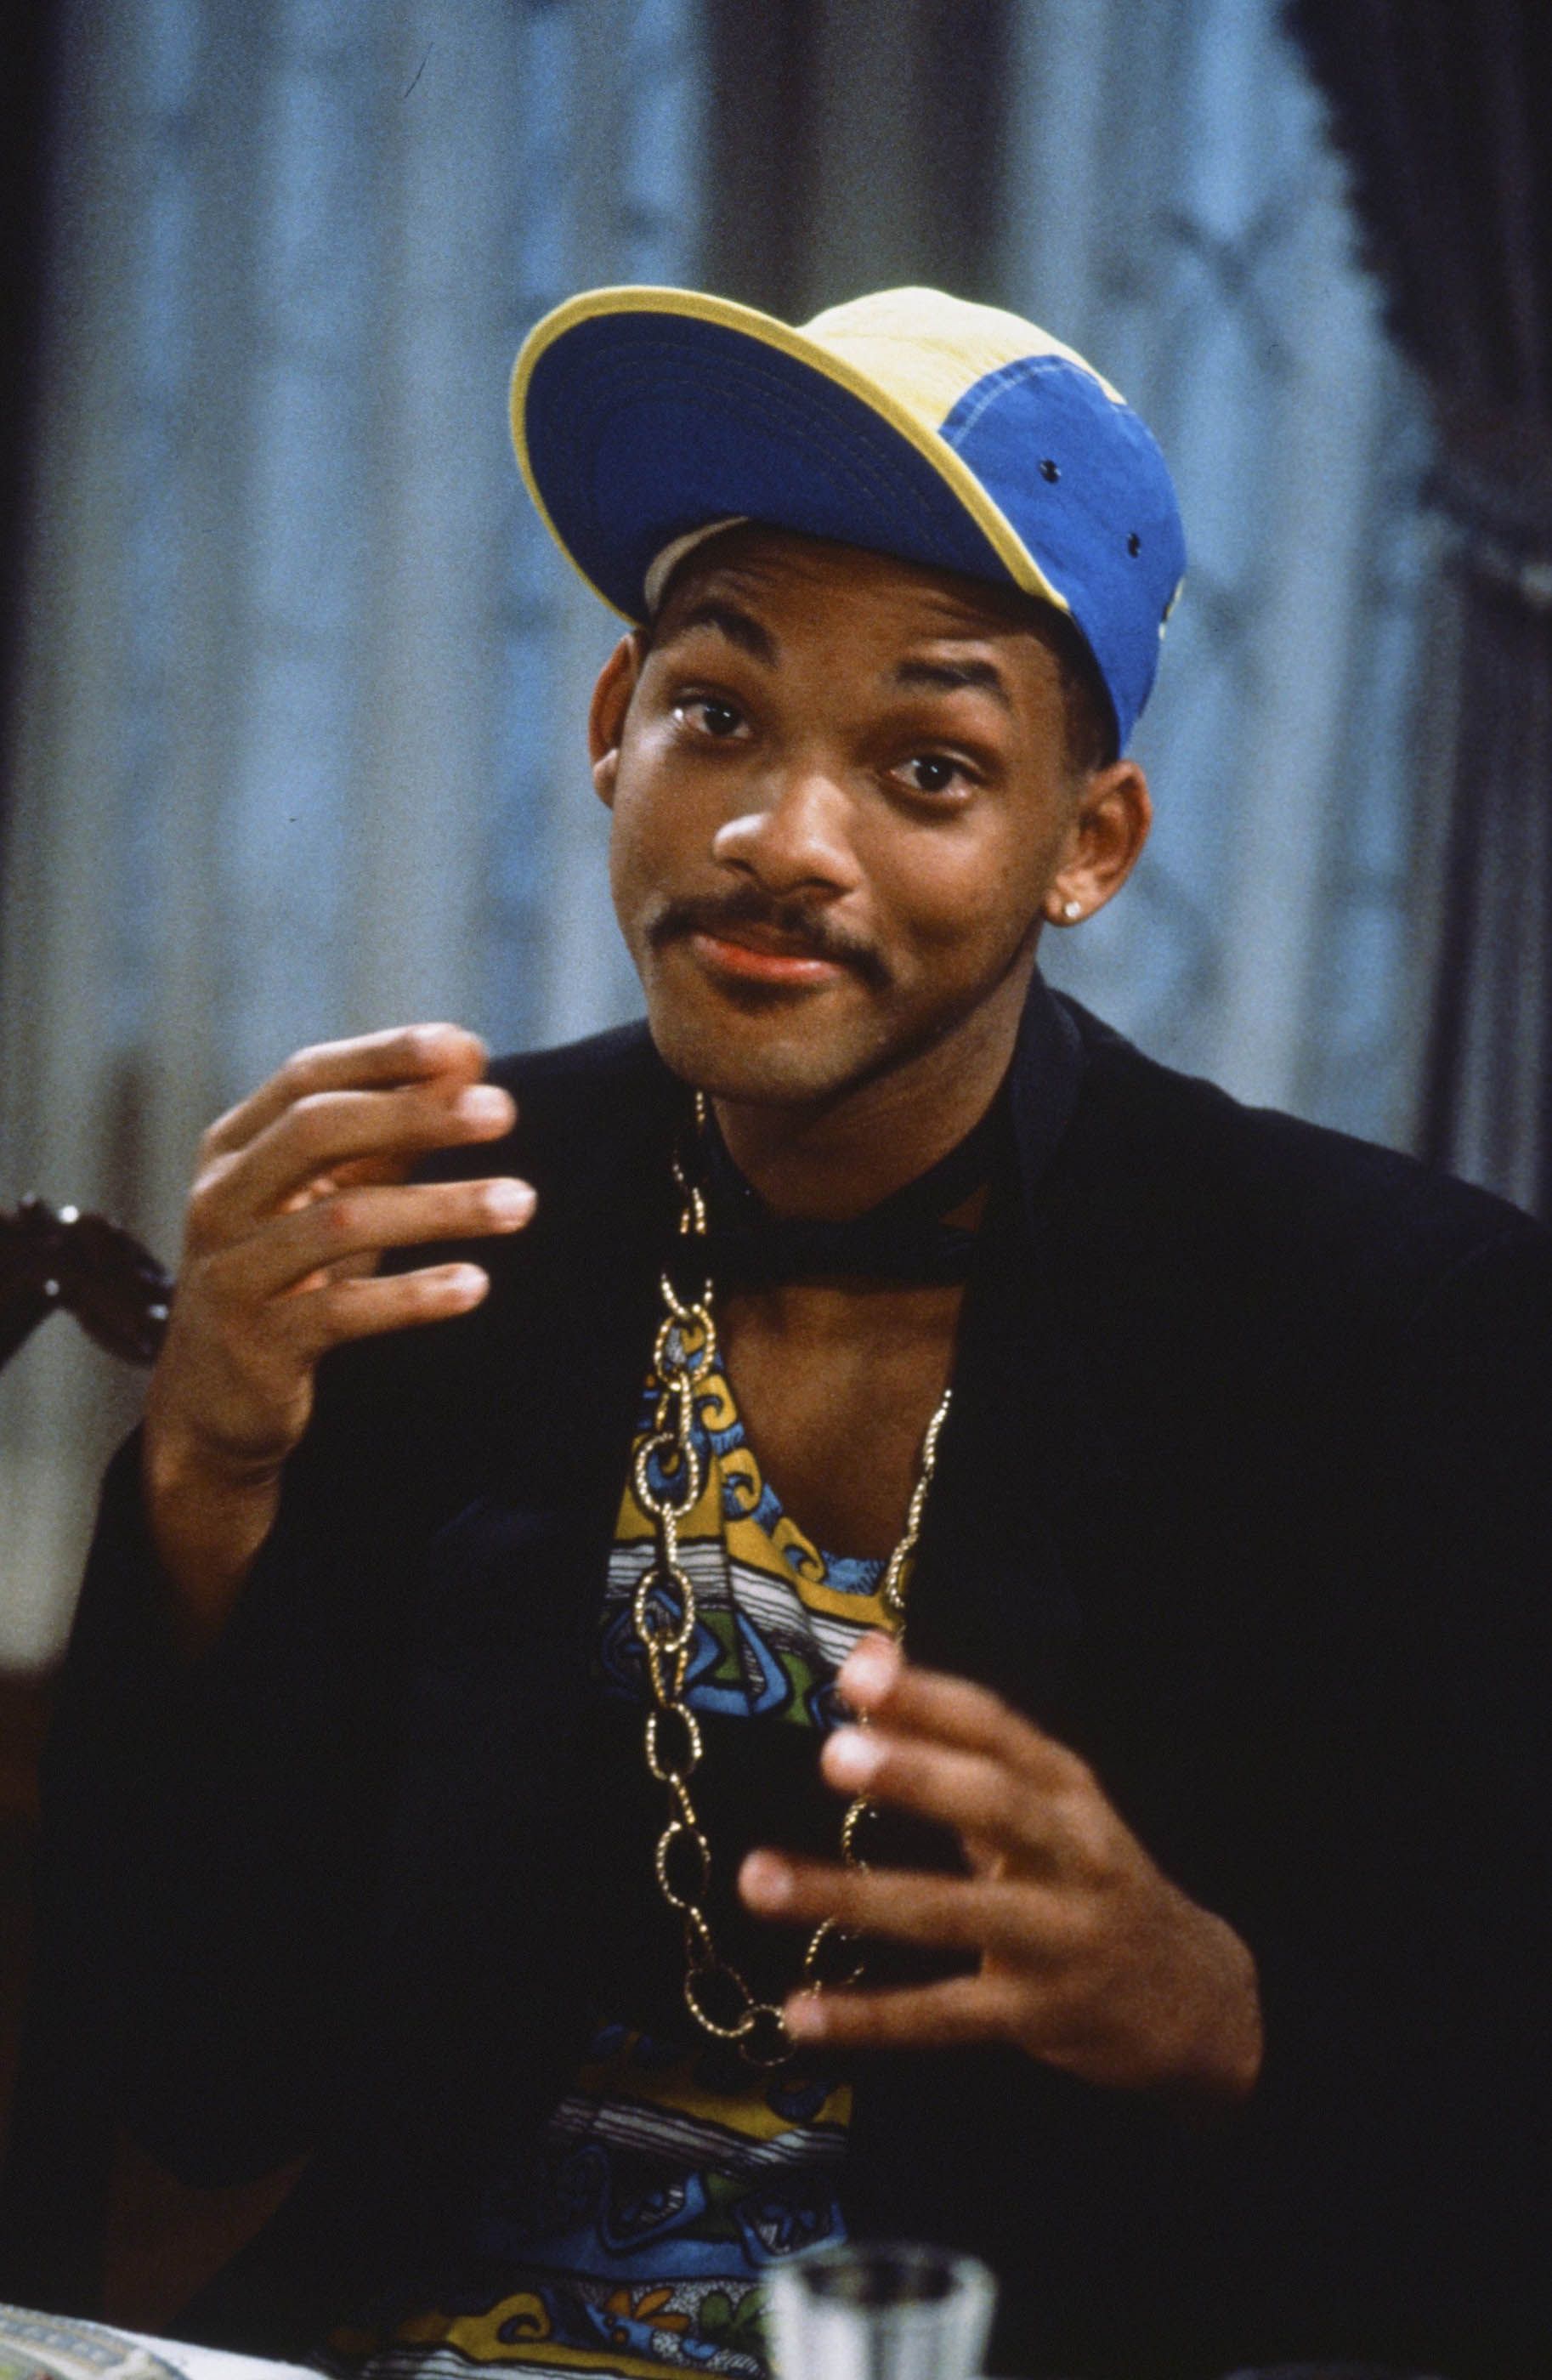 40 Rare Will Smith Photos - Pictures of Will Smith Through the Years